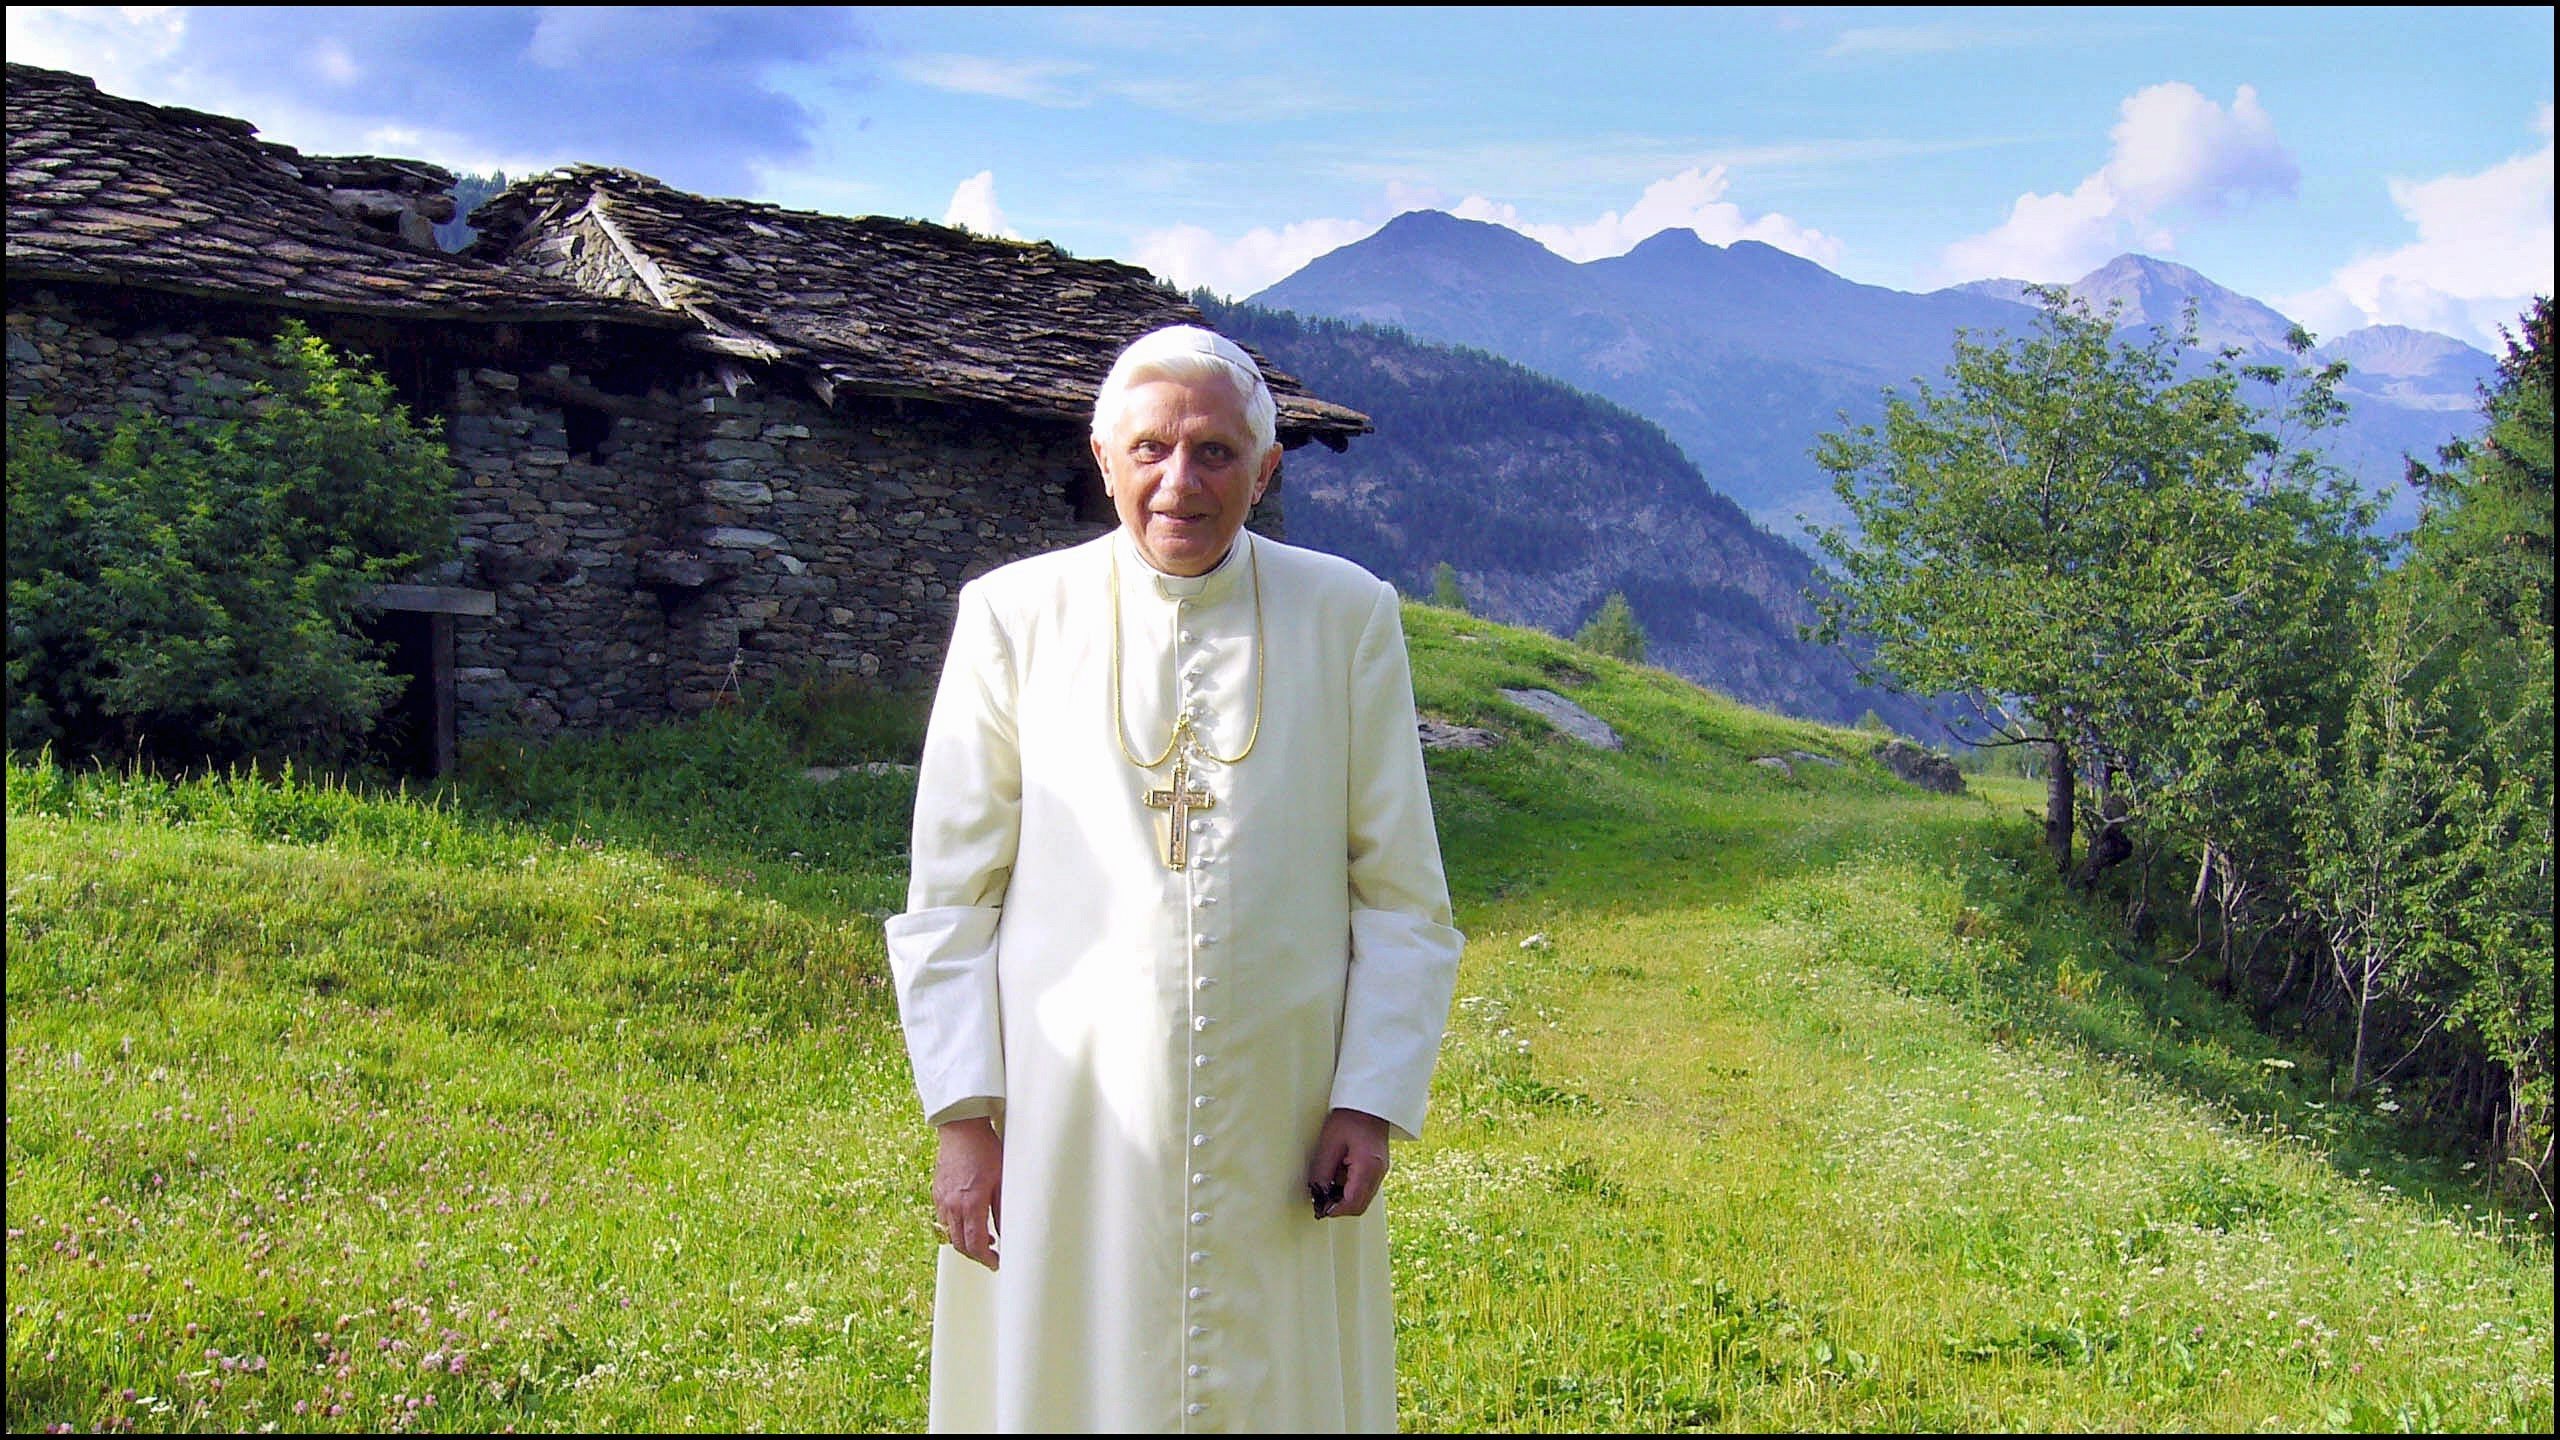 Pope Benedict XVI on summer holiday in the Italian Alps poses in Alpeggio Pileo near his residence in Les Combes in Italy on July 14th, 2005.